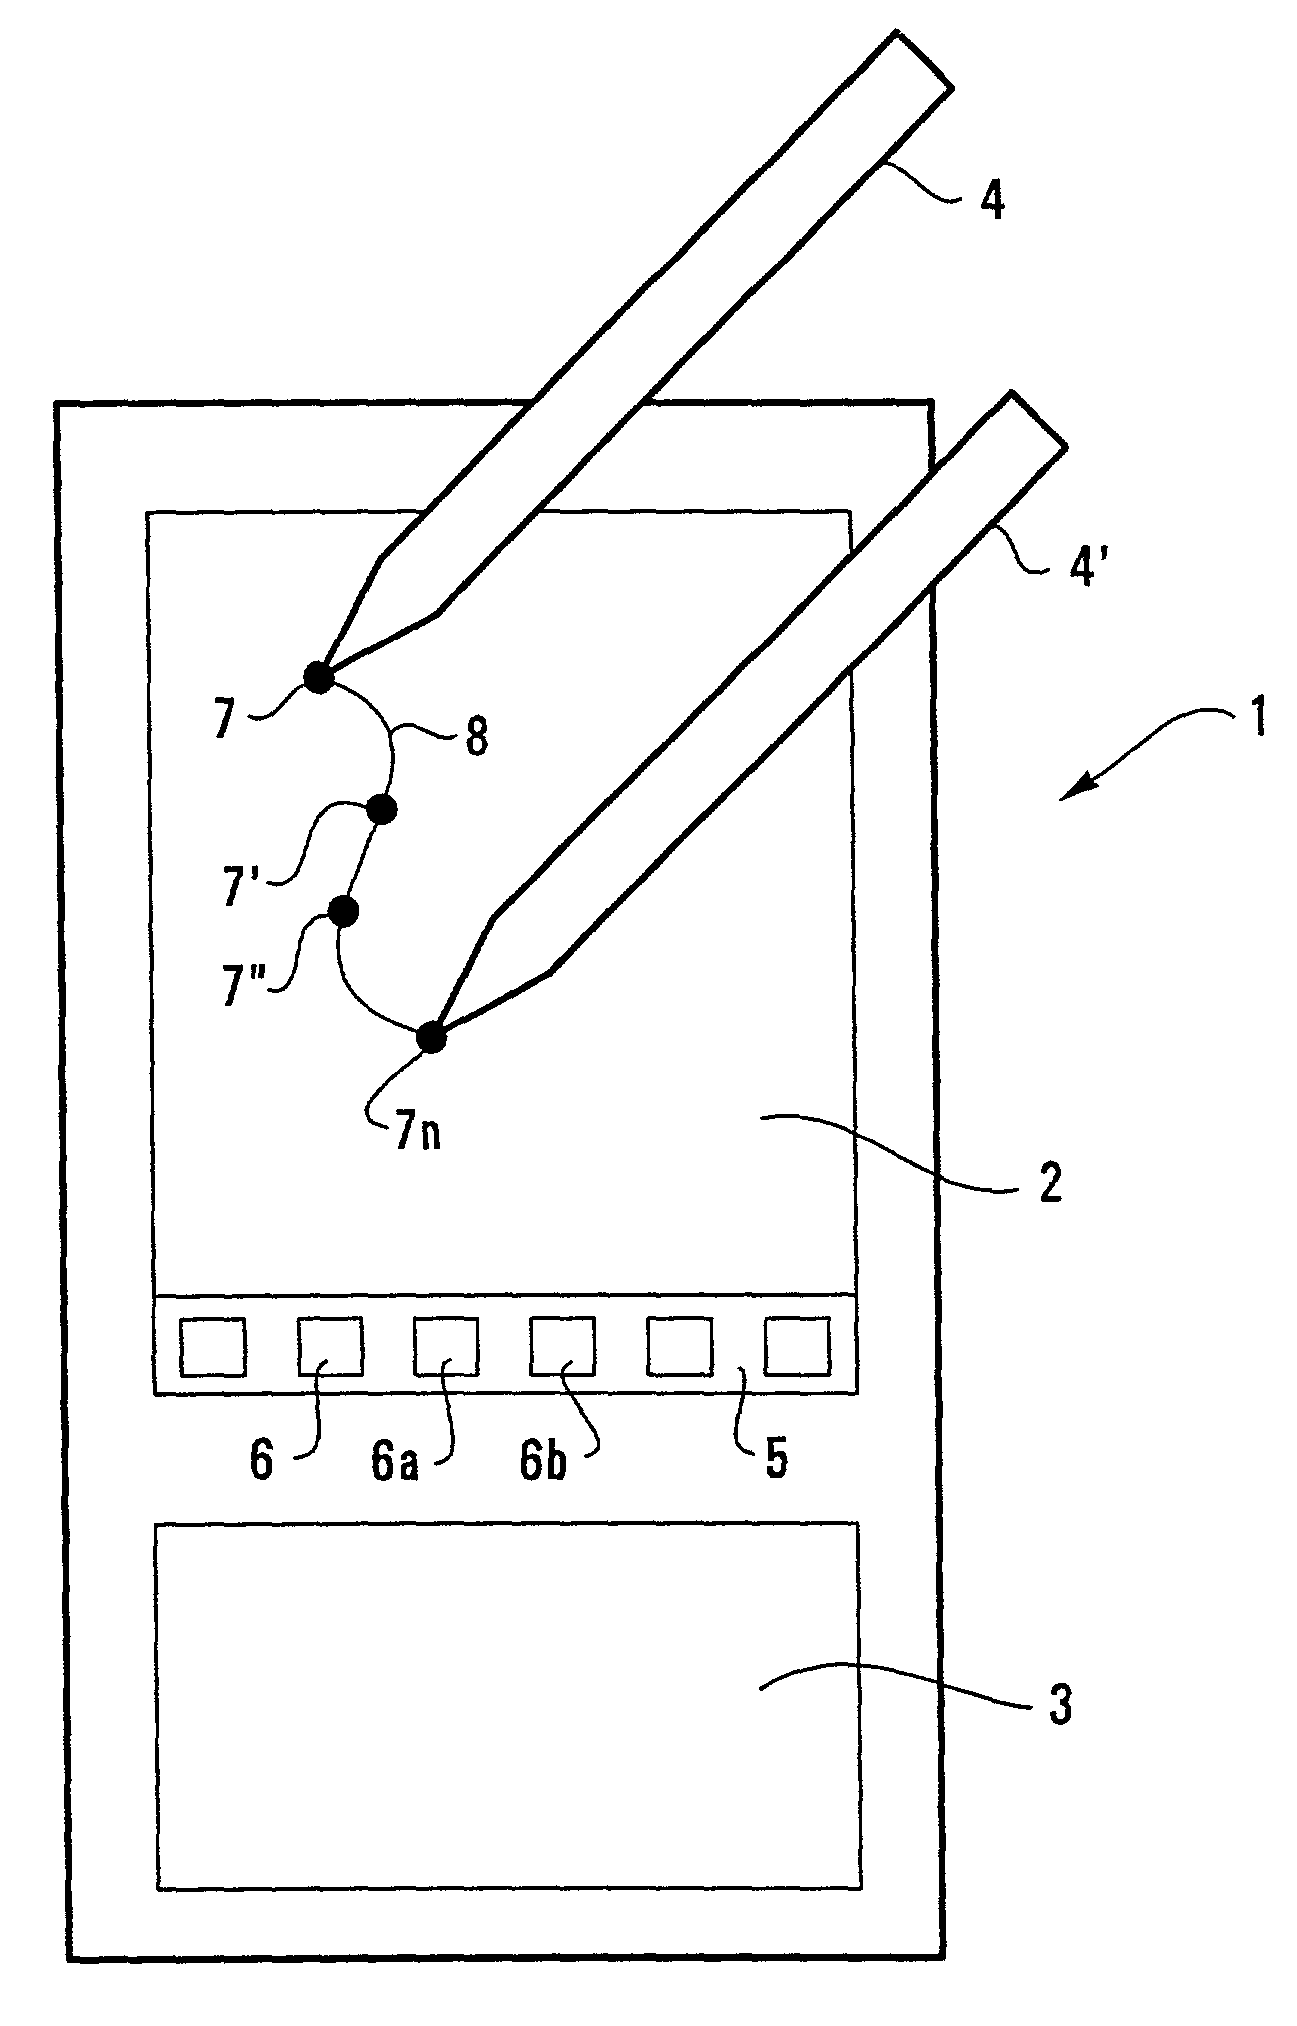 System and method for manipulating an image on a screen